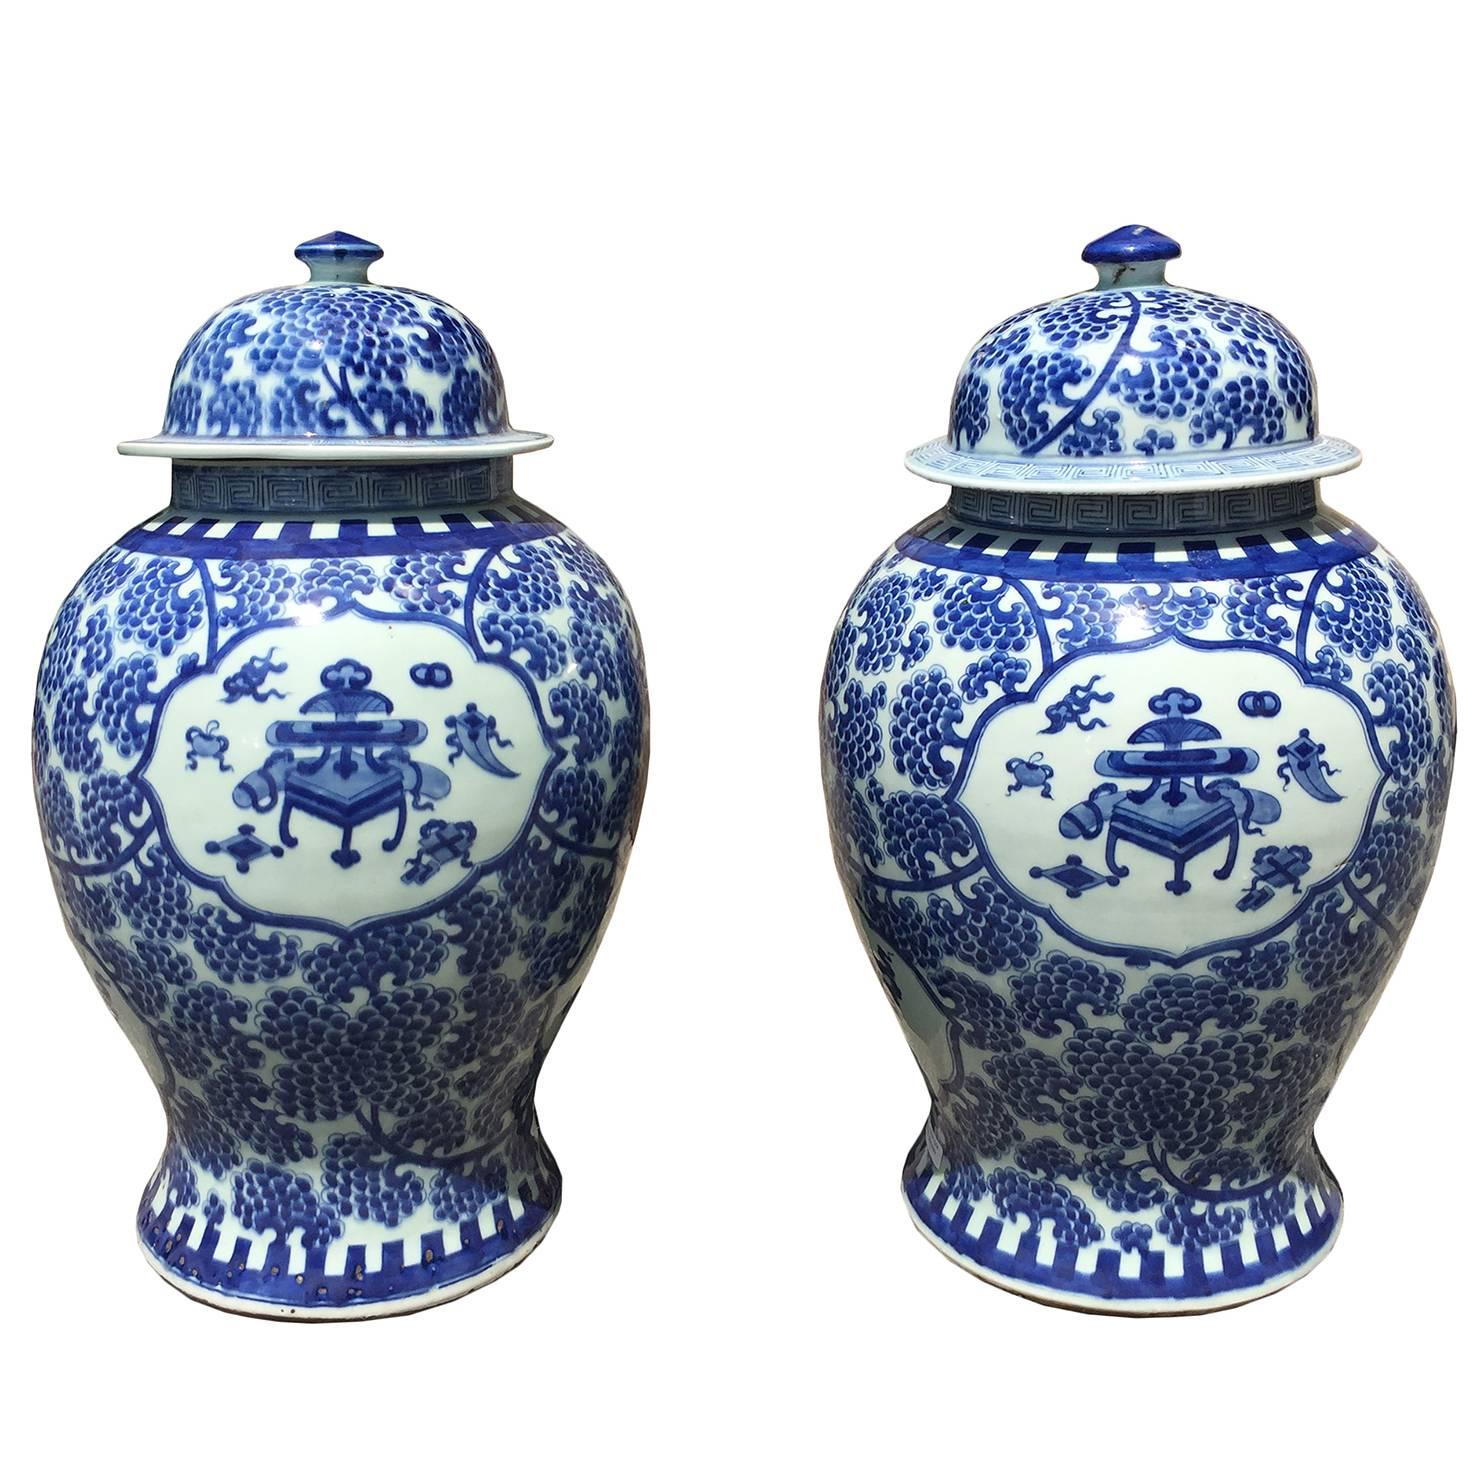 Pair of 19th Century Blue and White Chinese Export Jars